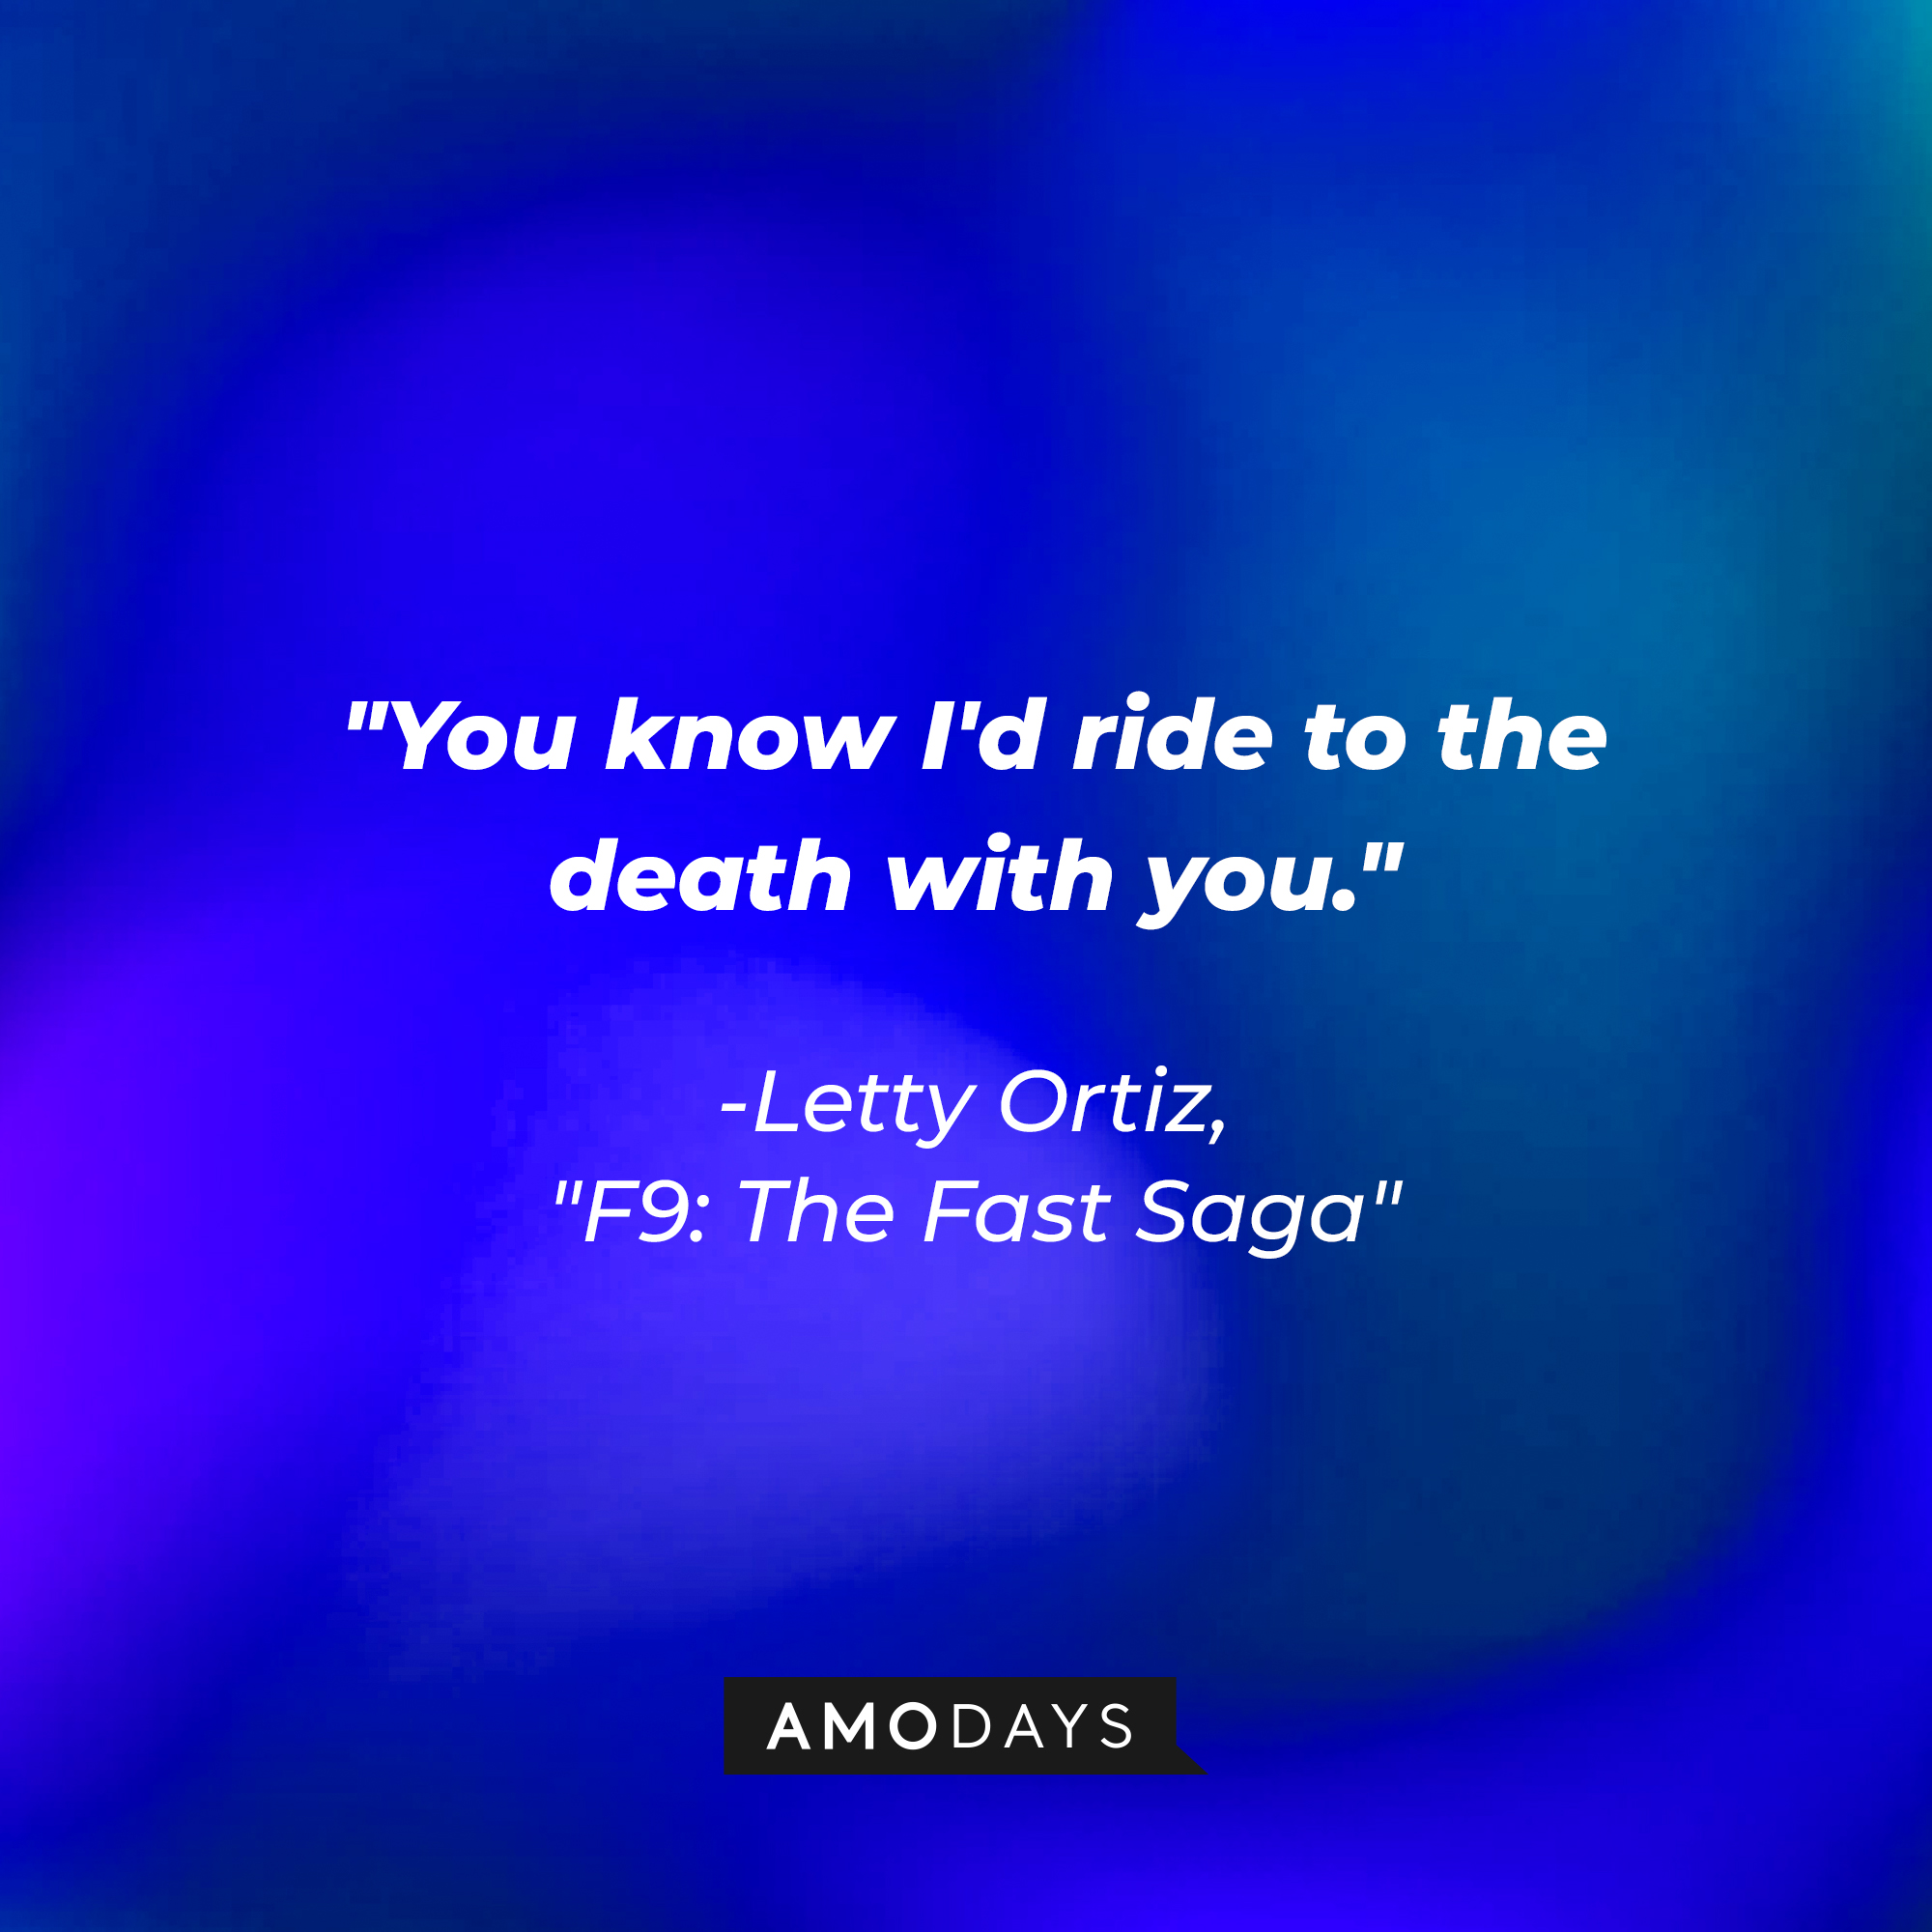 Letty Ortiz’s quote: "You know I'd ride to the death with you." | Image: AmoDays